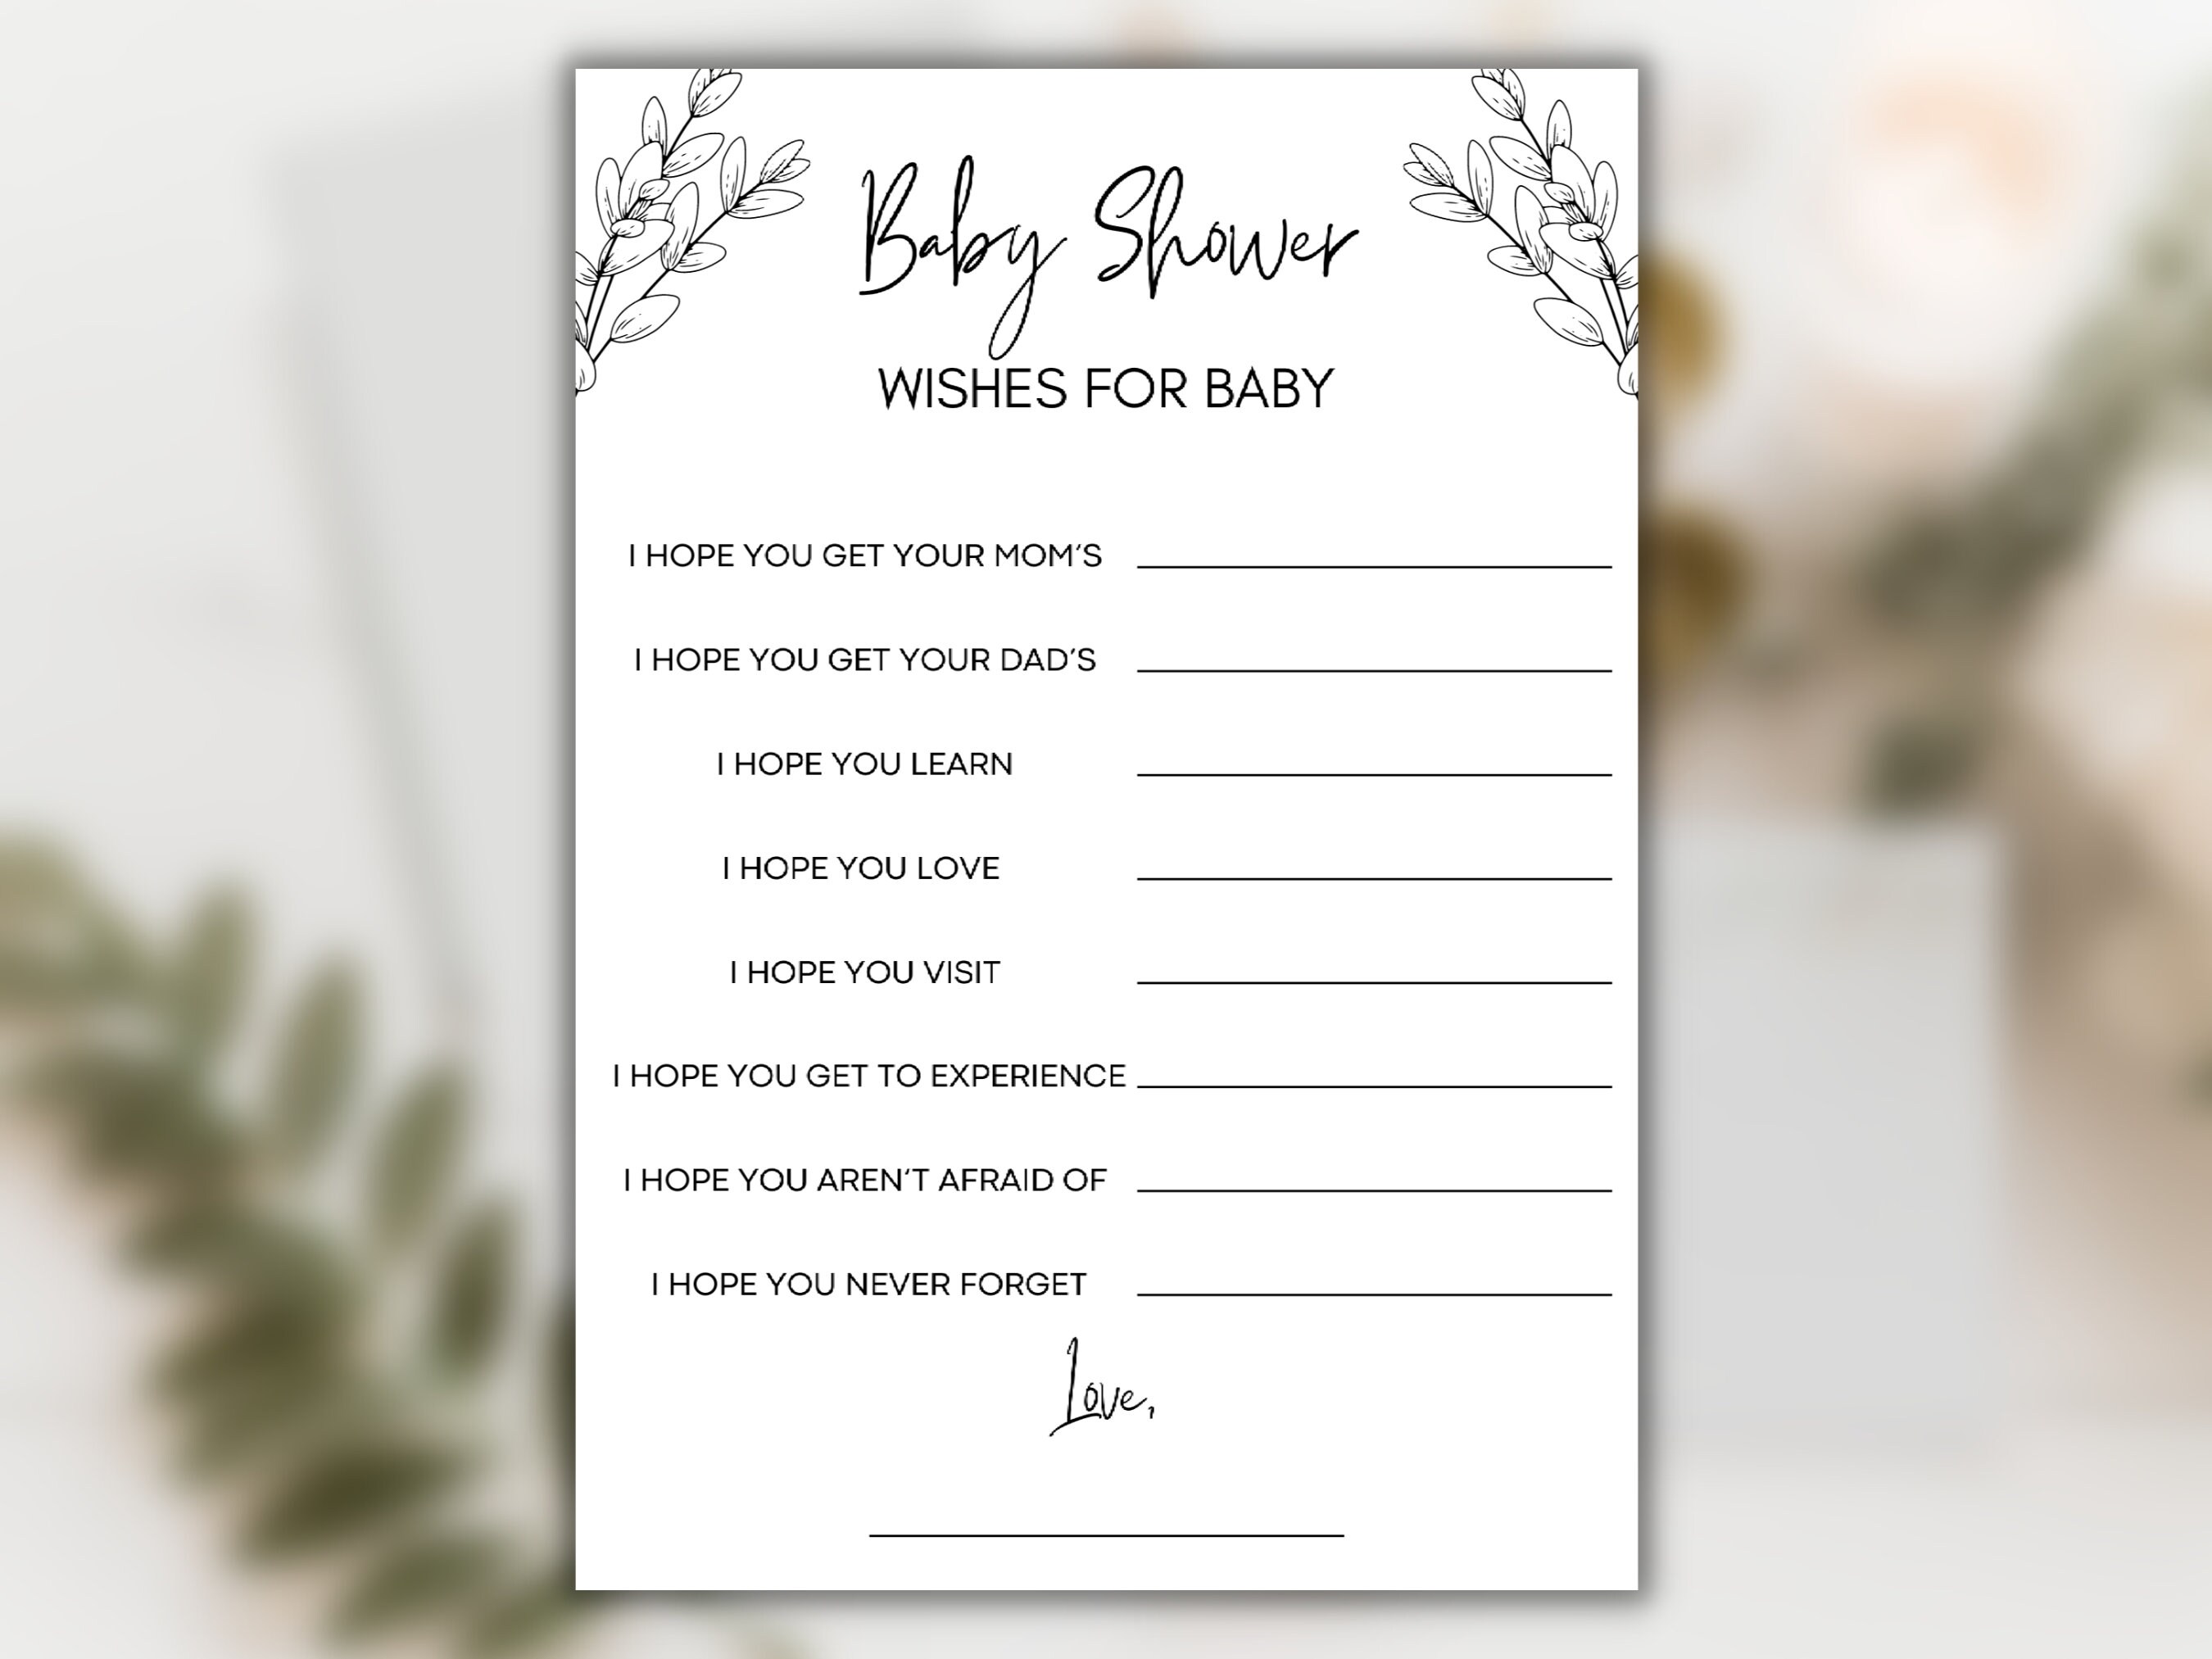 Wishes For Baby - Baby Shower Activity (teacher made)